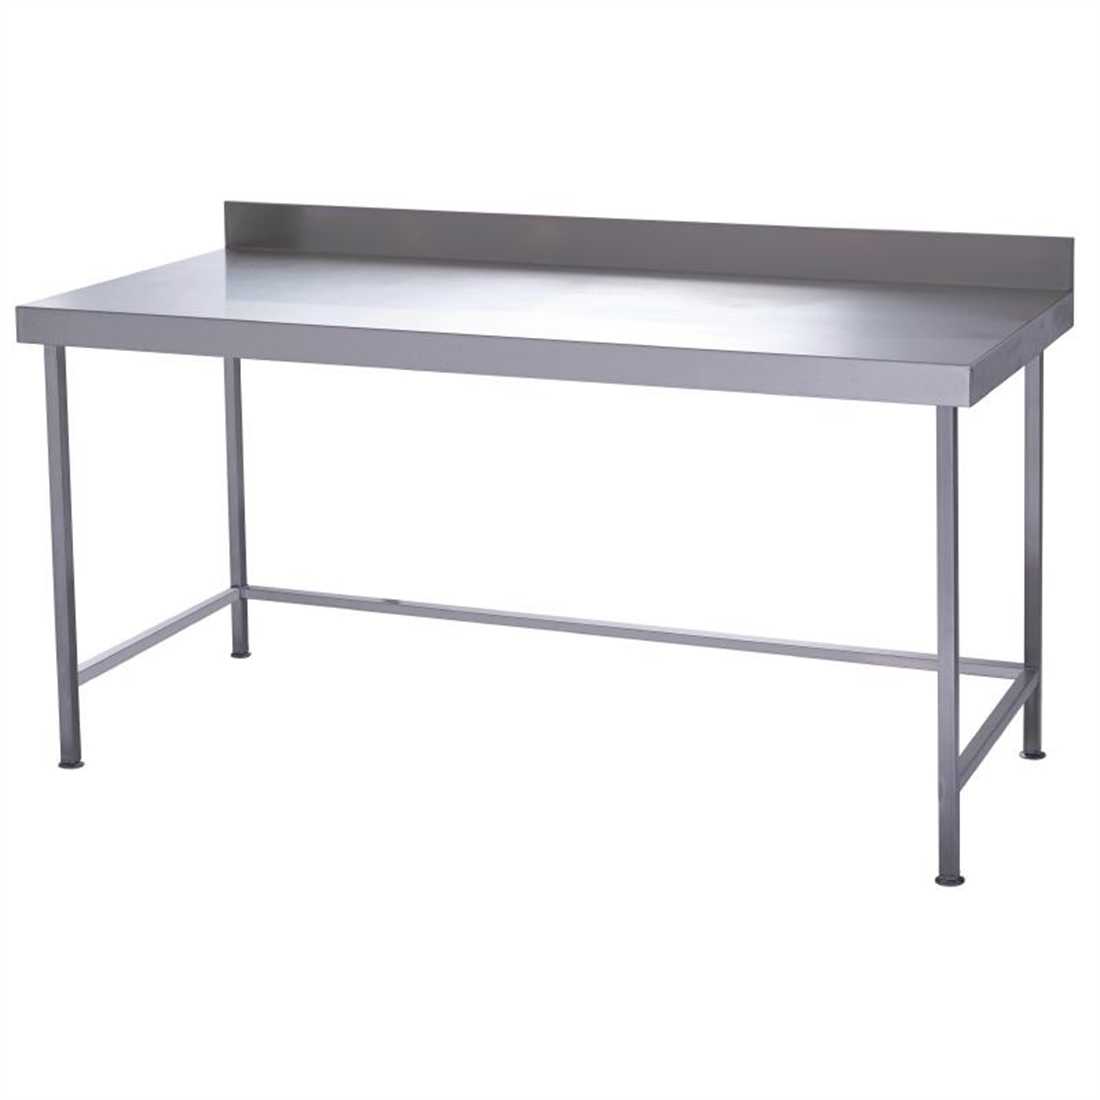 Parry Fully Welded Stainless Steel Wall Table 600x600mm